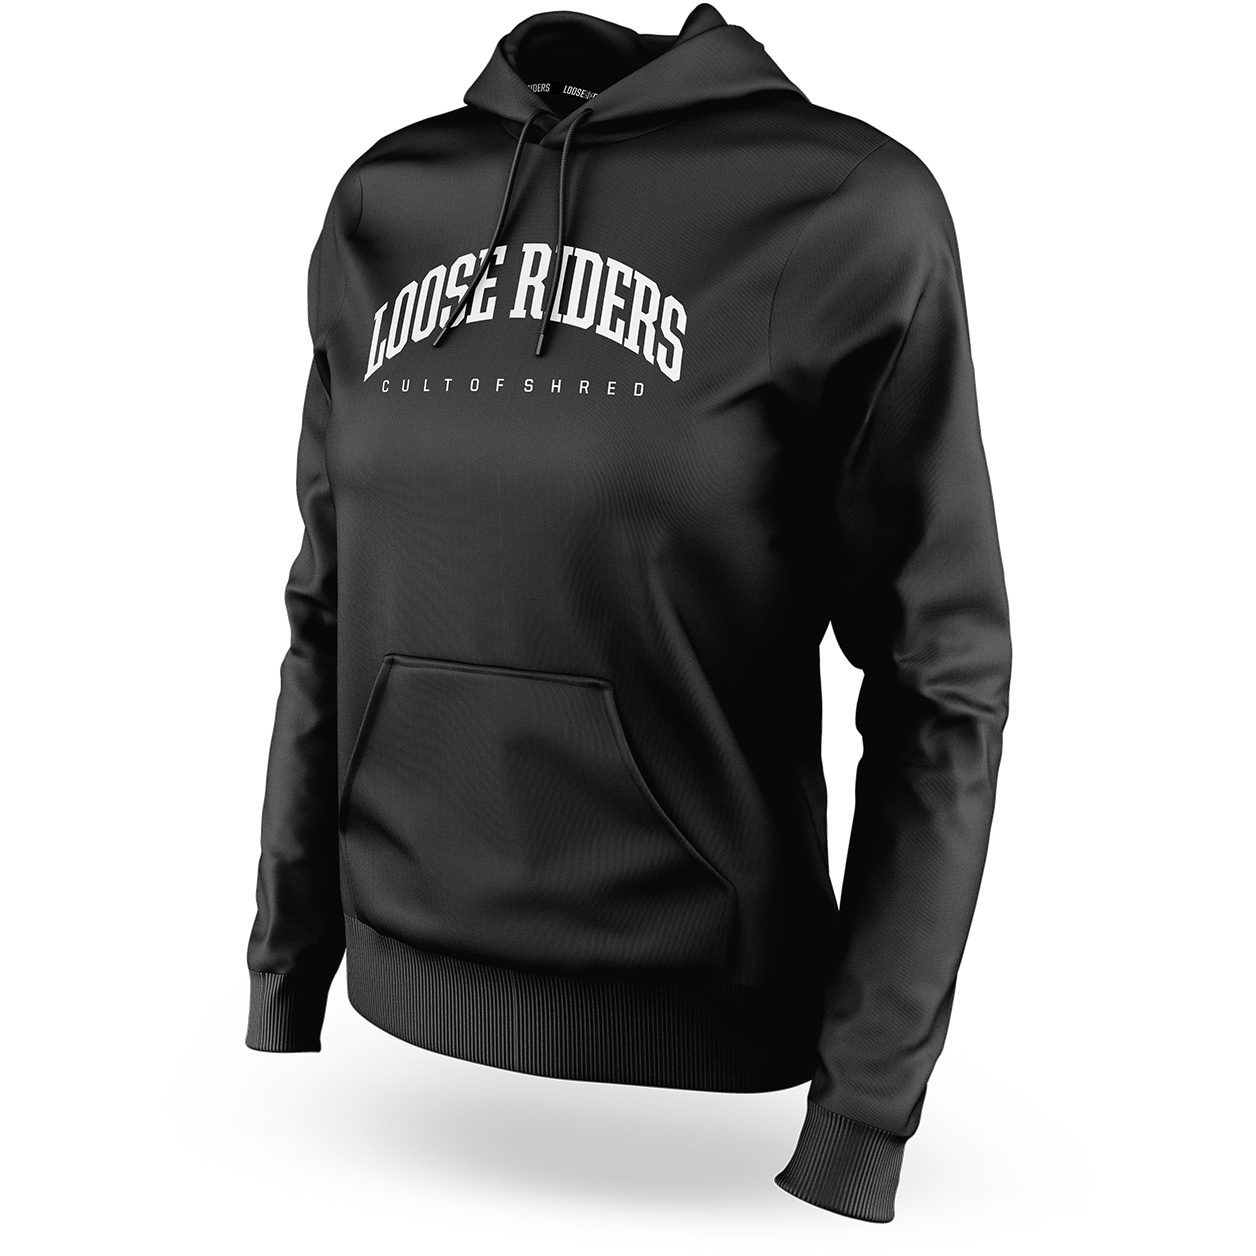 Picture of Loose Riders Classic Lifestyle Womens Hoody Pullover - Black